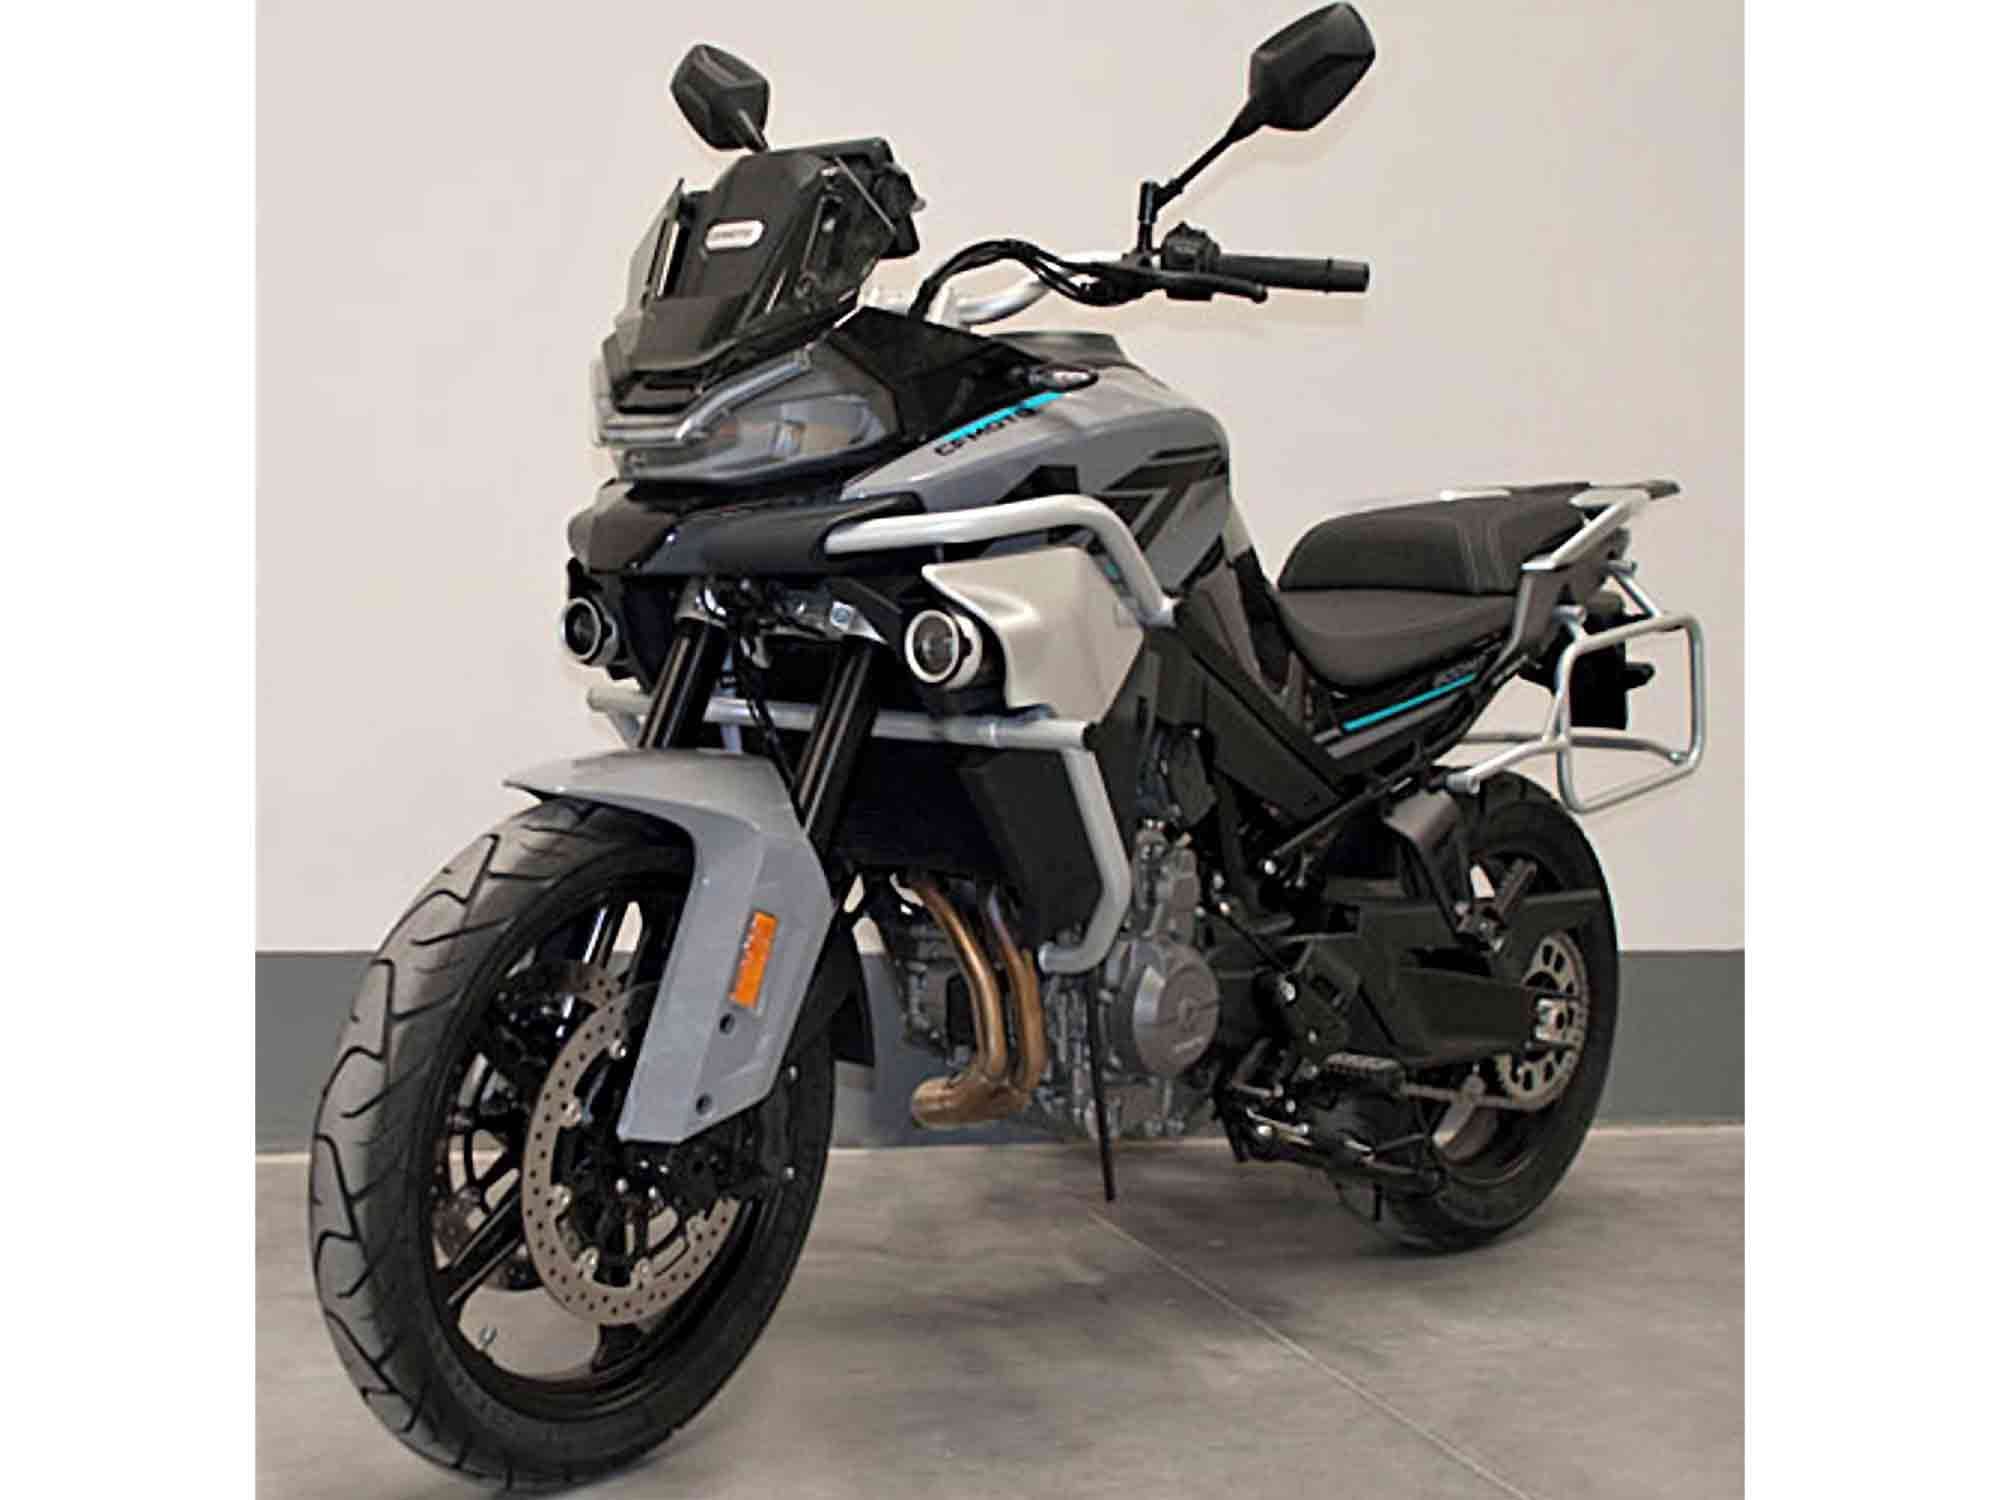 The more road-oriented trim features alloy wheels, but both models have the same KTM-sourced frame.